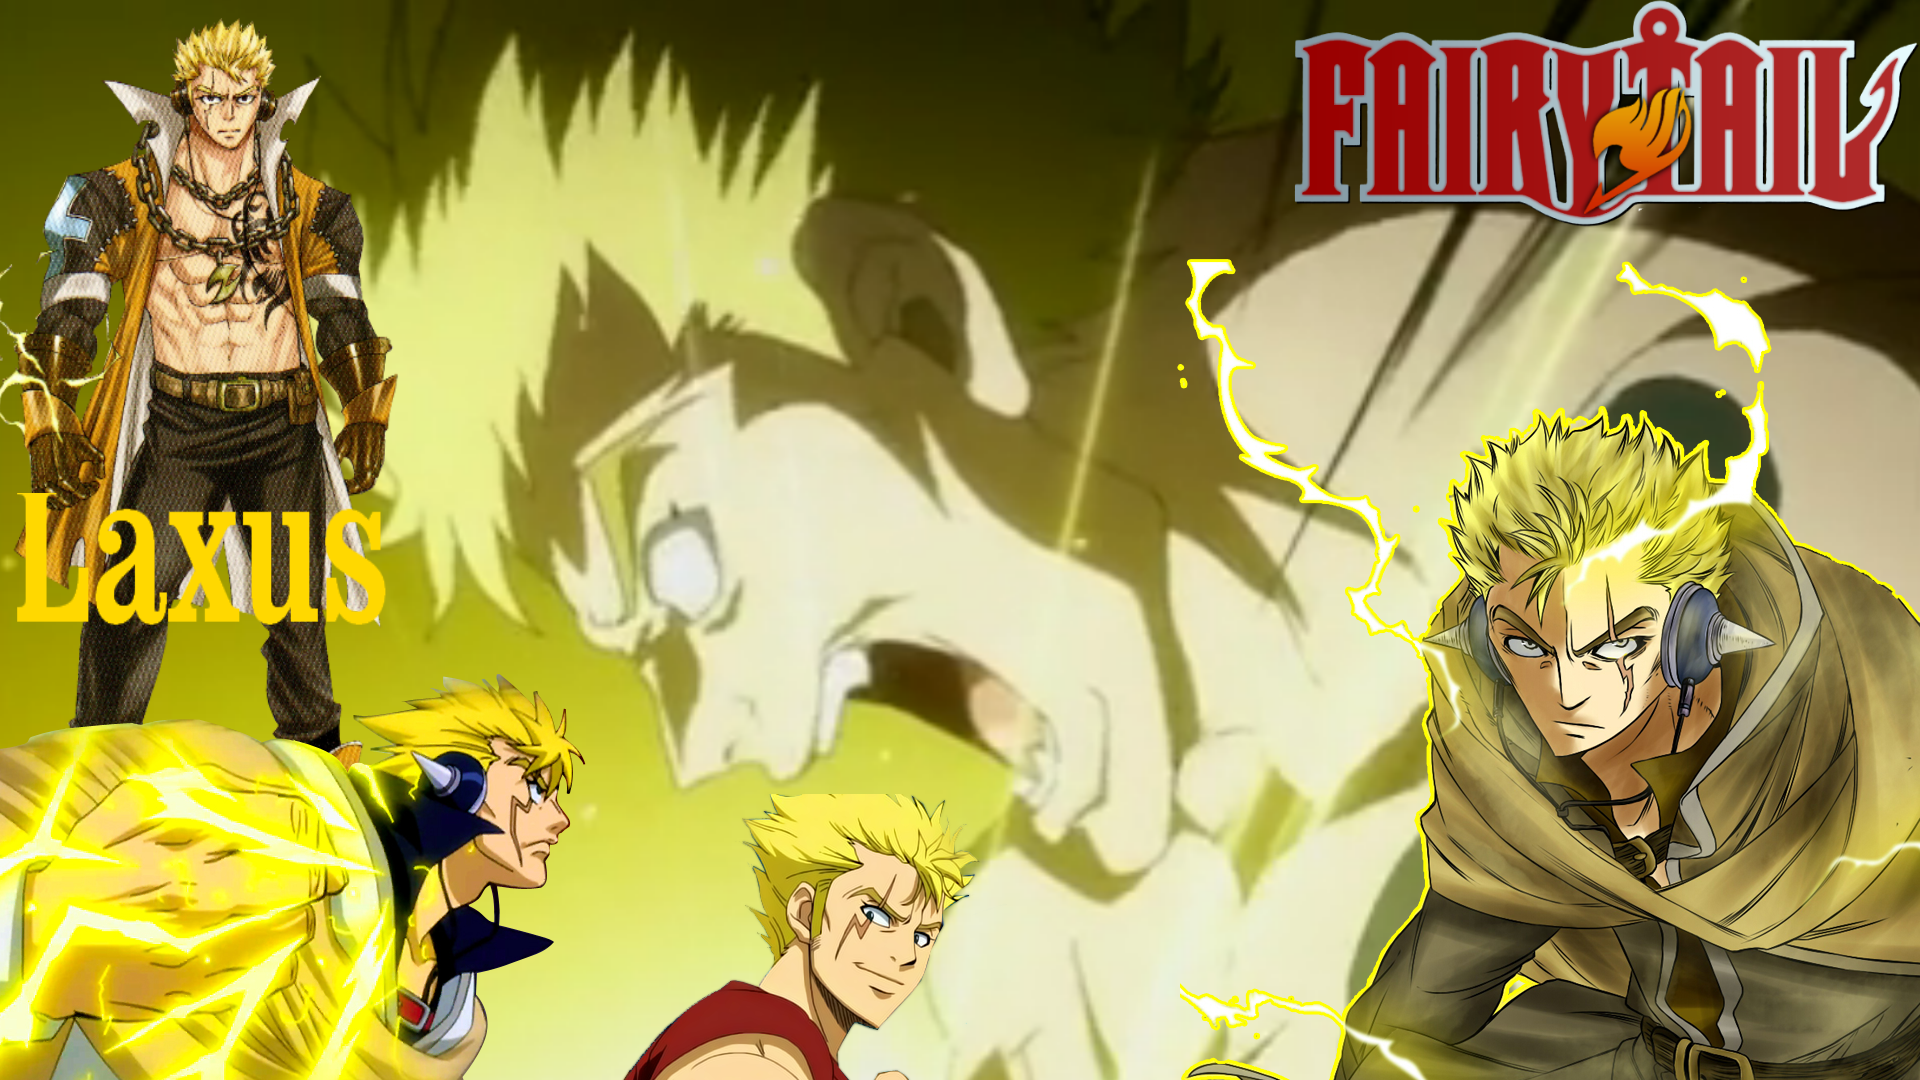 Fairy Tail Image Laxus Dreyar HD Wallpaper And Background